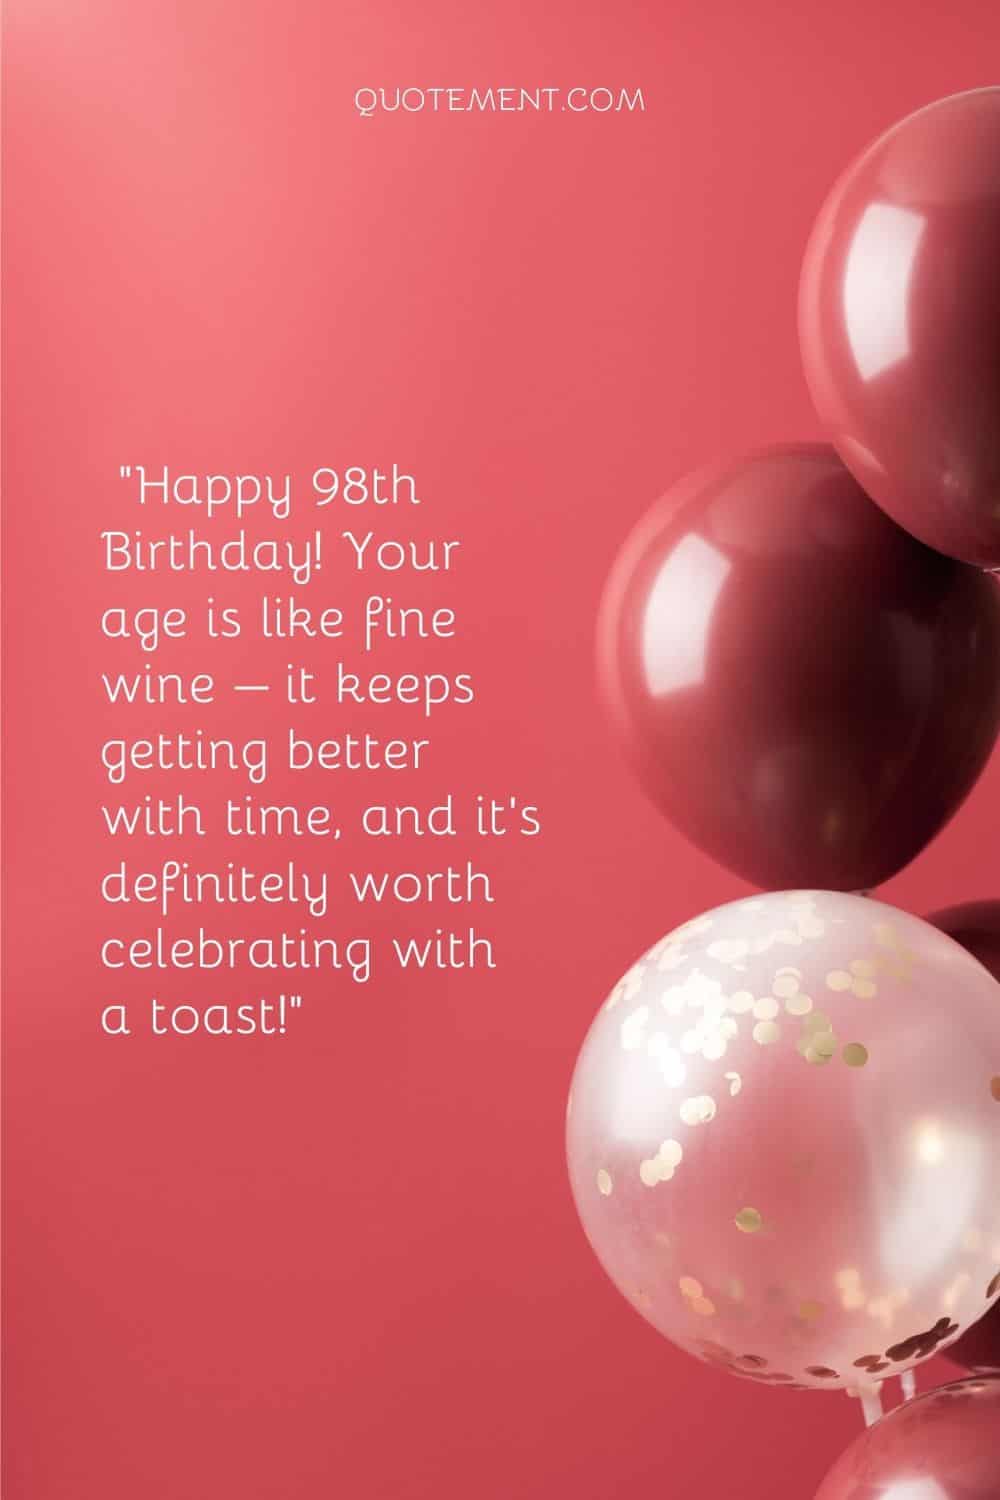 Happy 98th Birthday! Your age is like fine wine – it keeps getting better with time, and it's definitely worth celebrating with a toast!